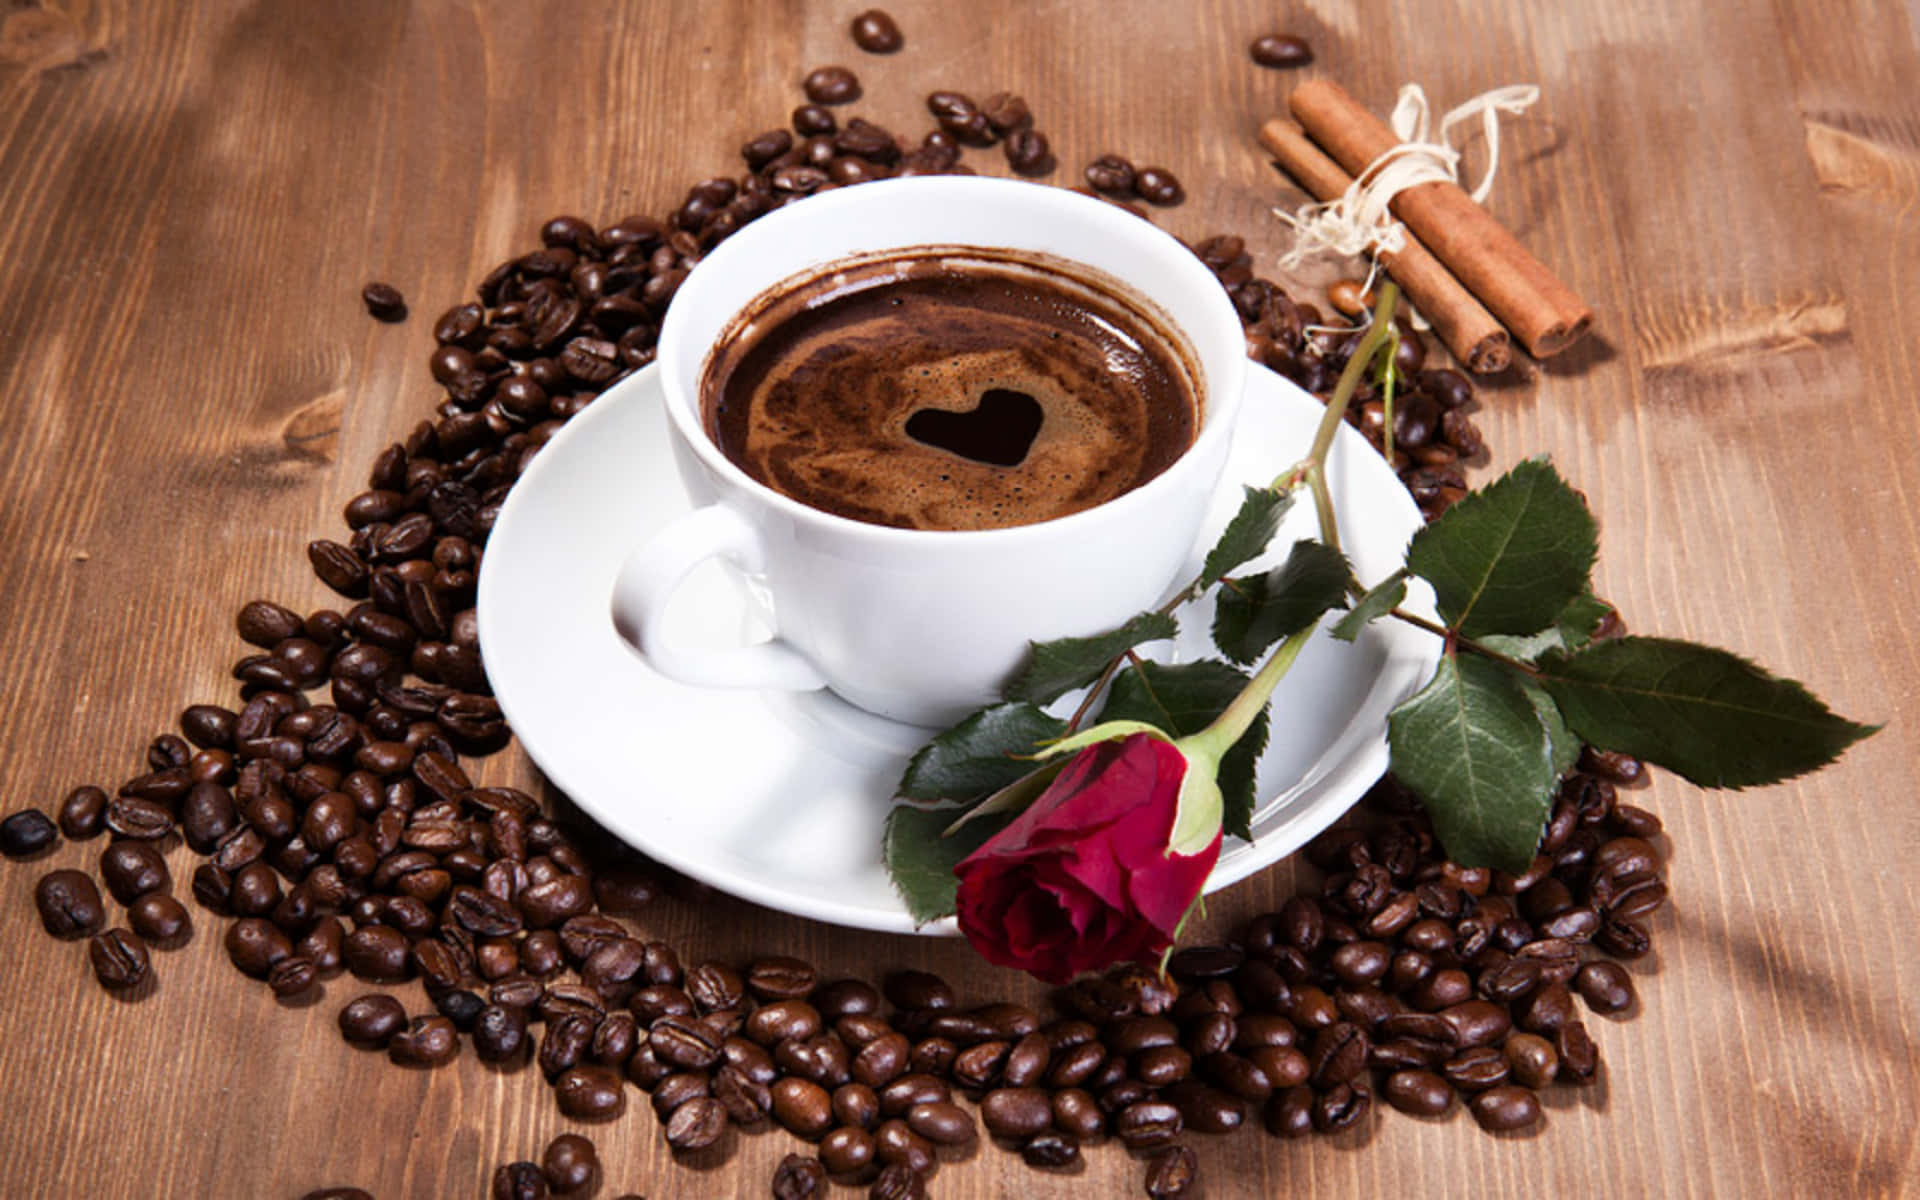 Enjoy a Fresh Start With a Cup of Morning Coffee